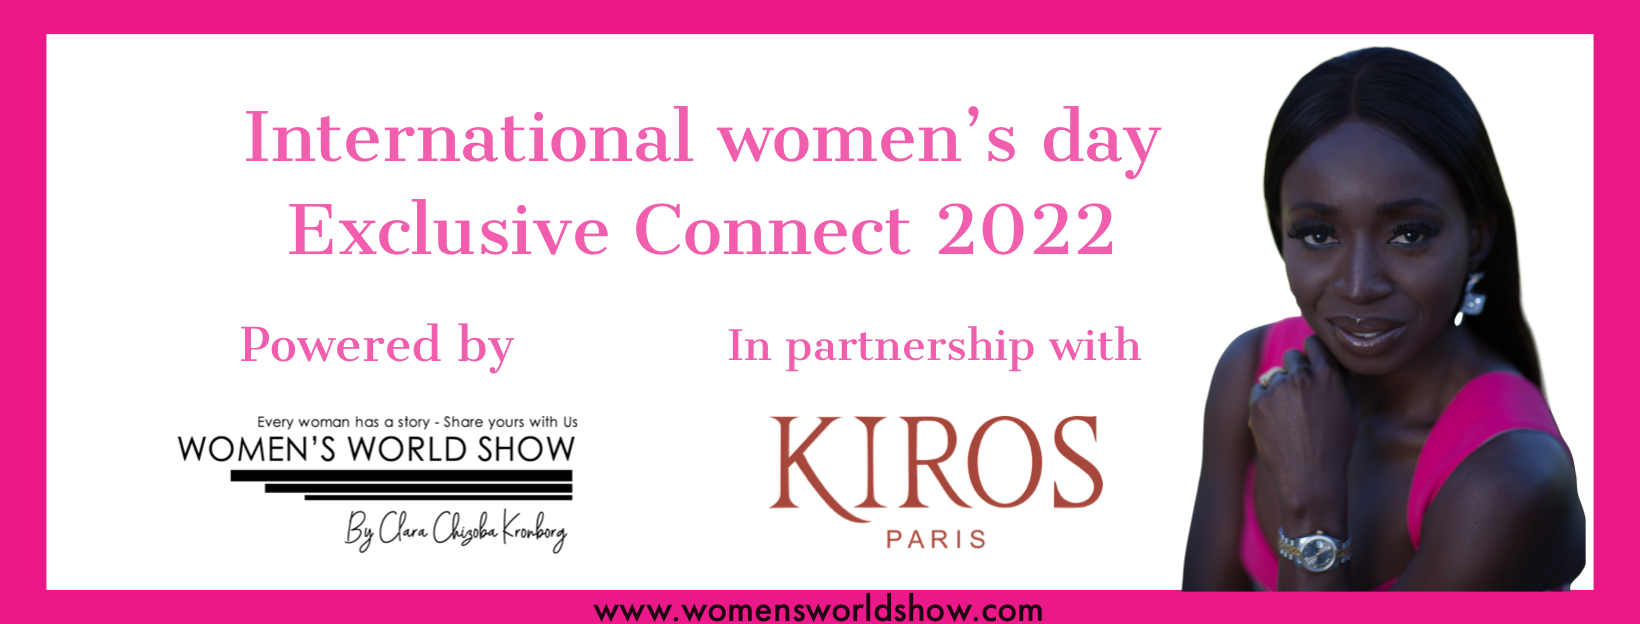 International women's Day Exclusive Connect  2022 